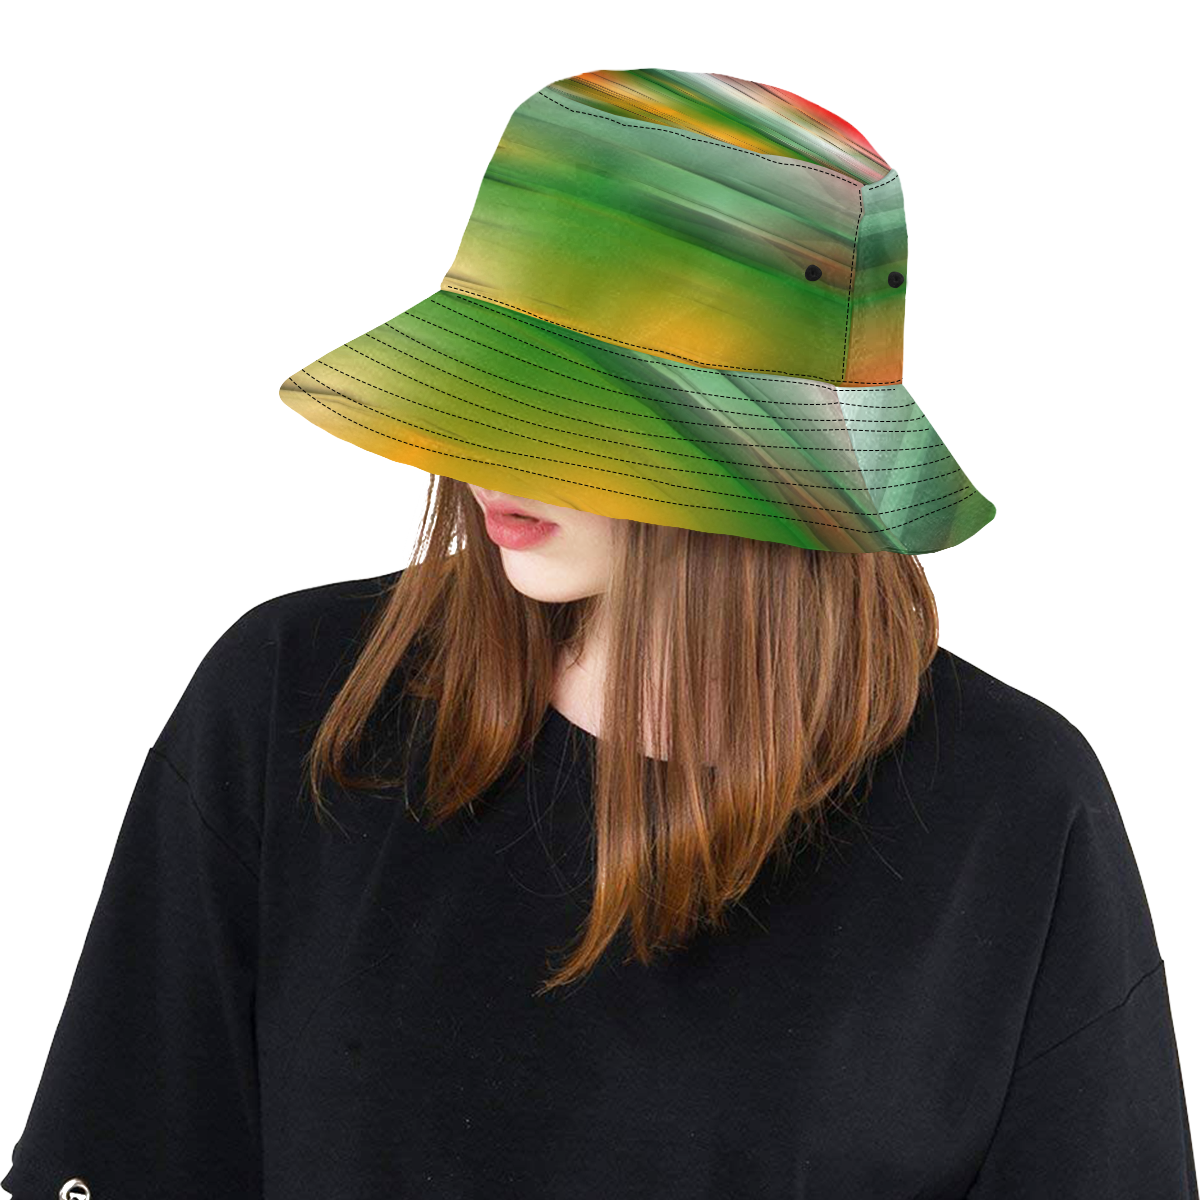 noisy gradient 3 by JamColors All Over Print Bucket Hat